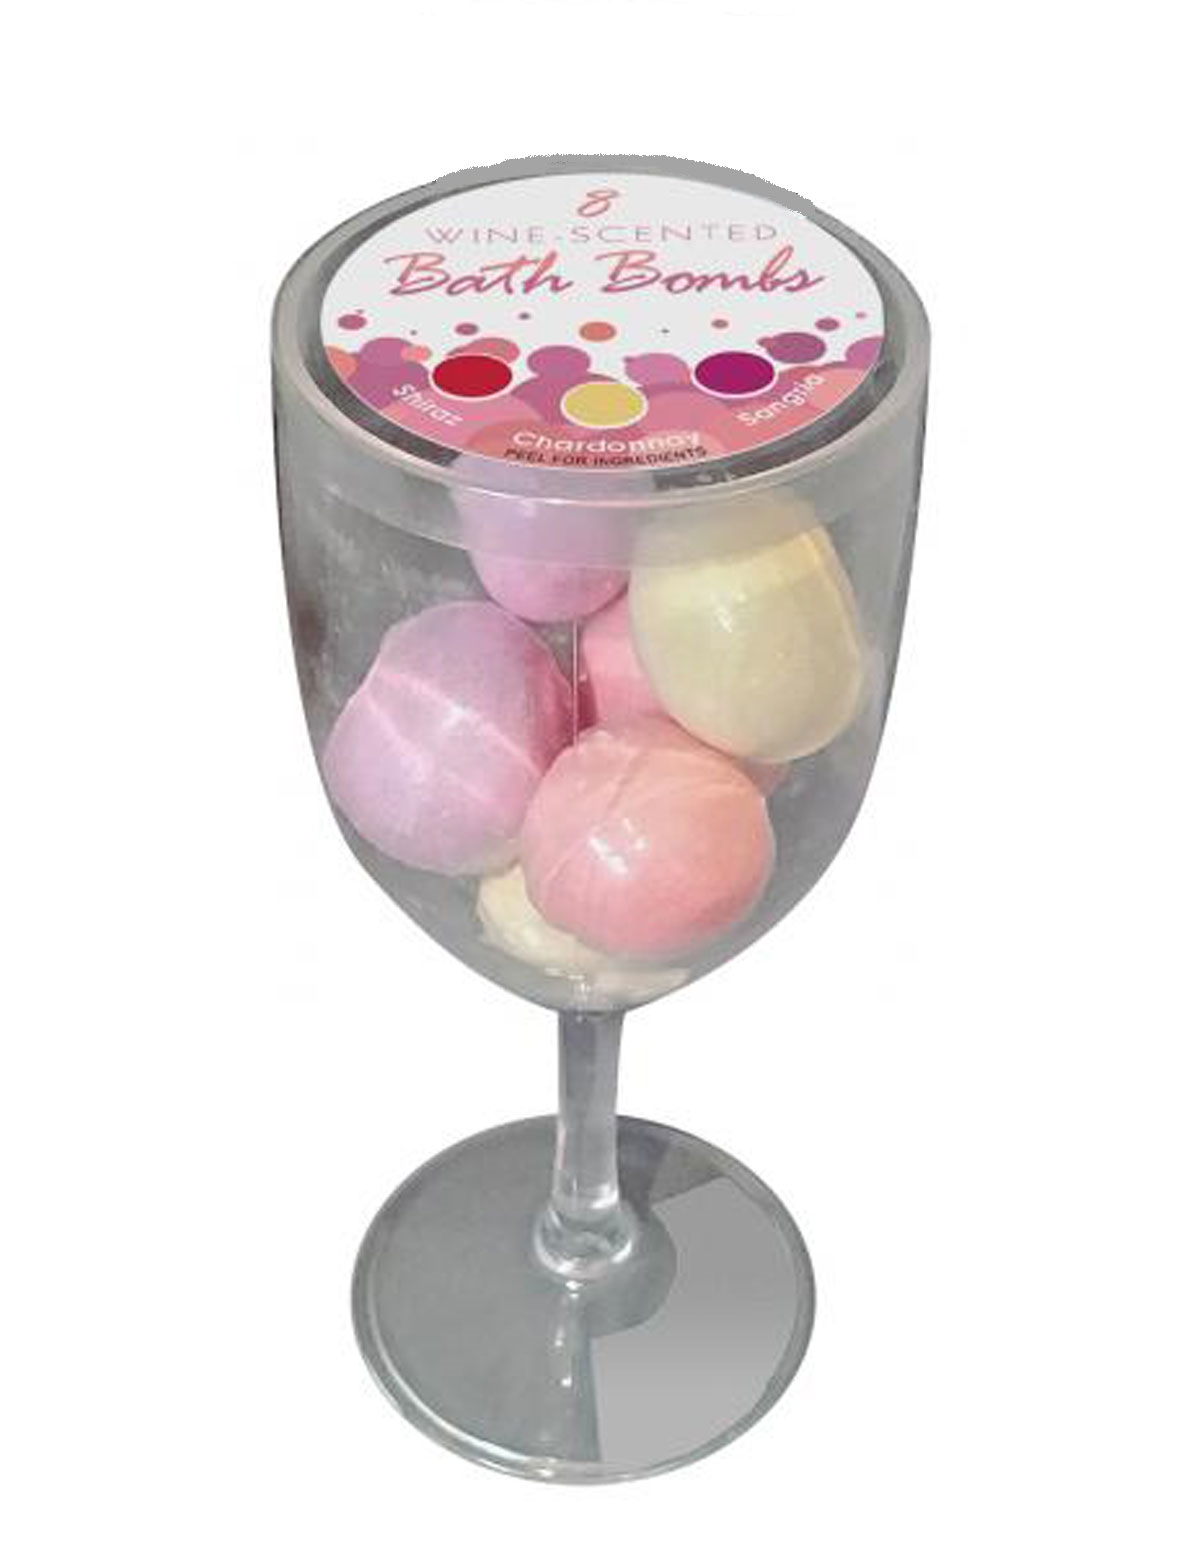 alternate image for Wine Scented Bath Bombs